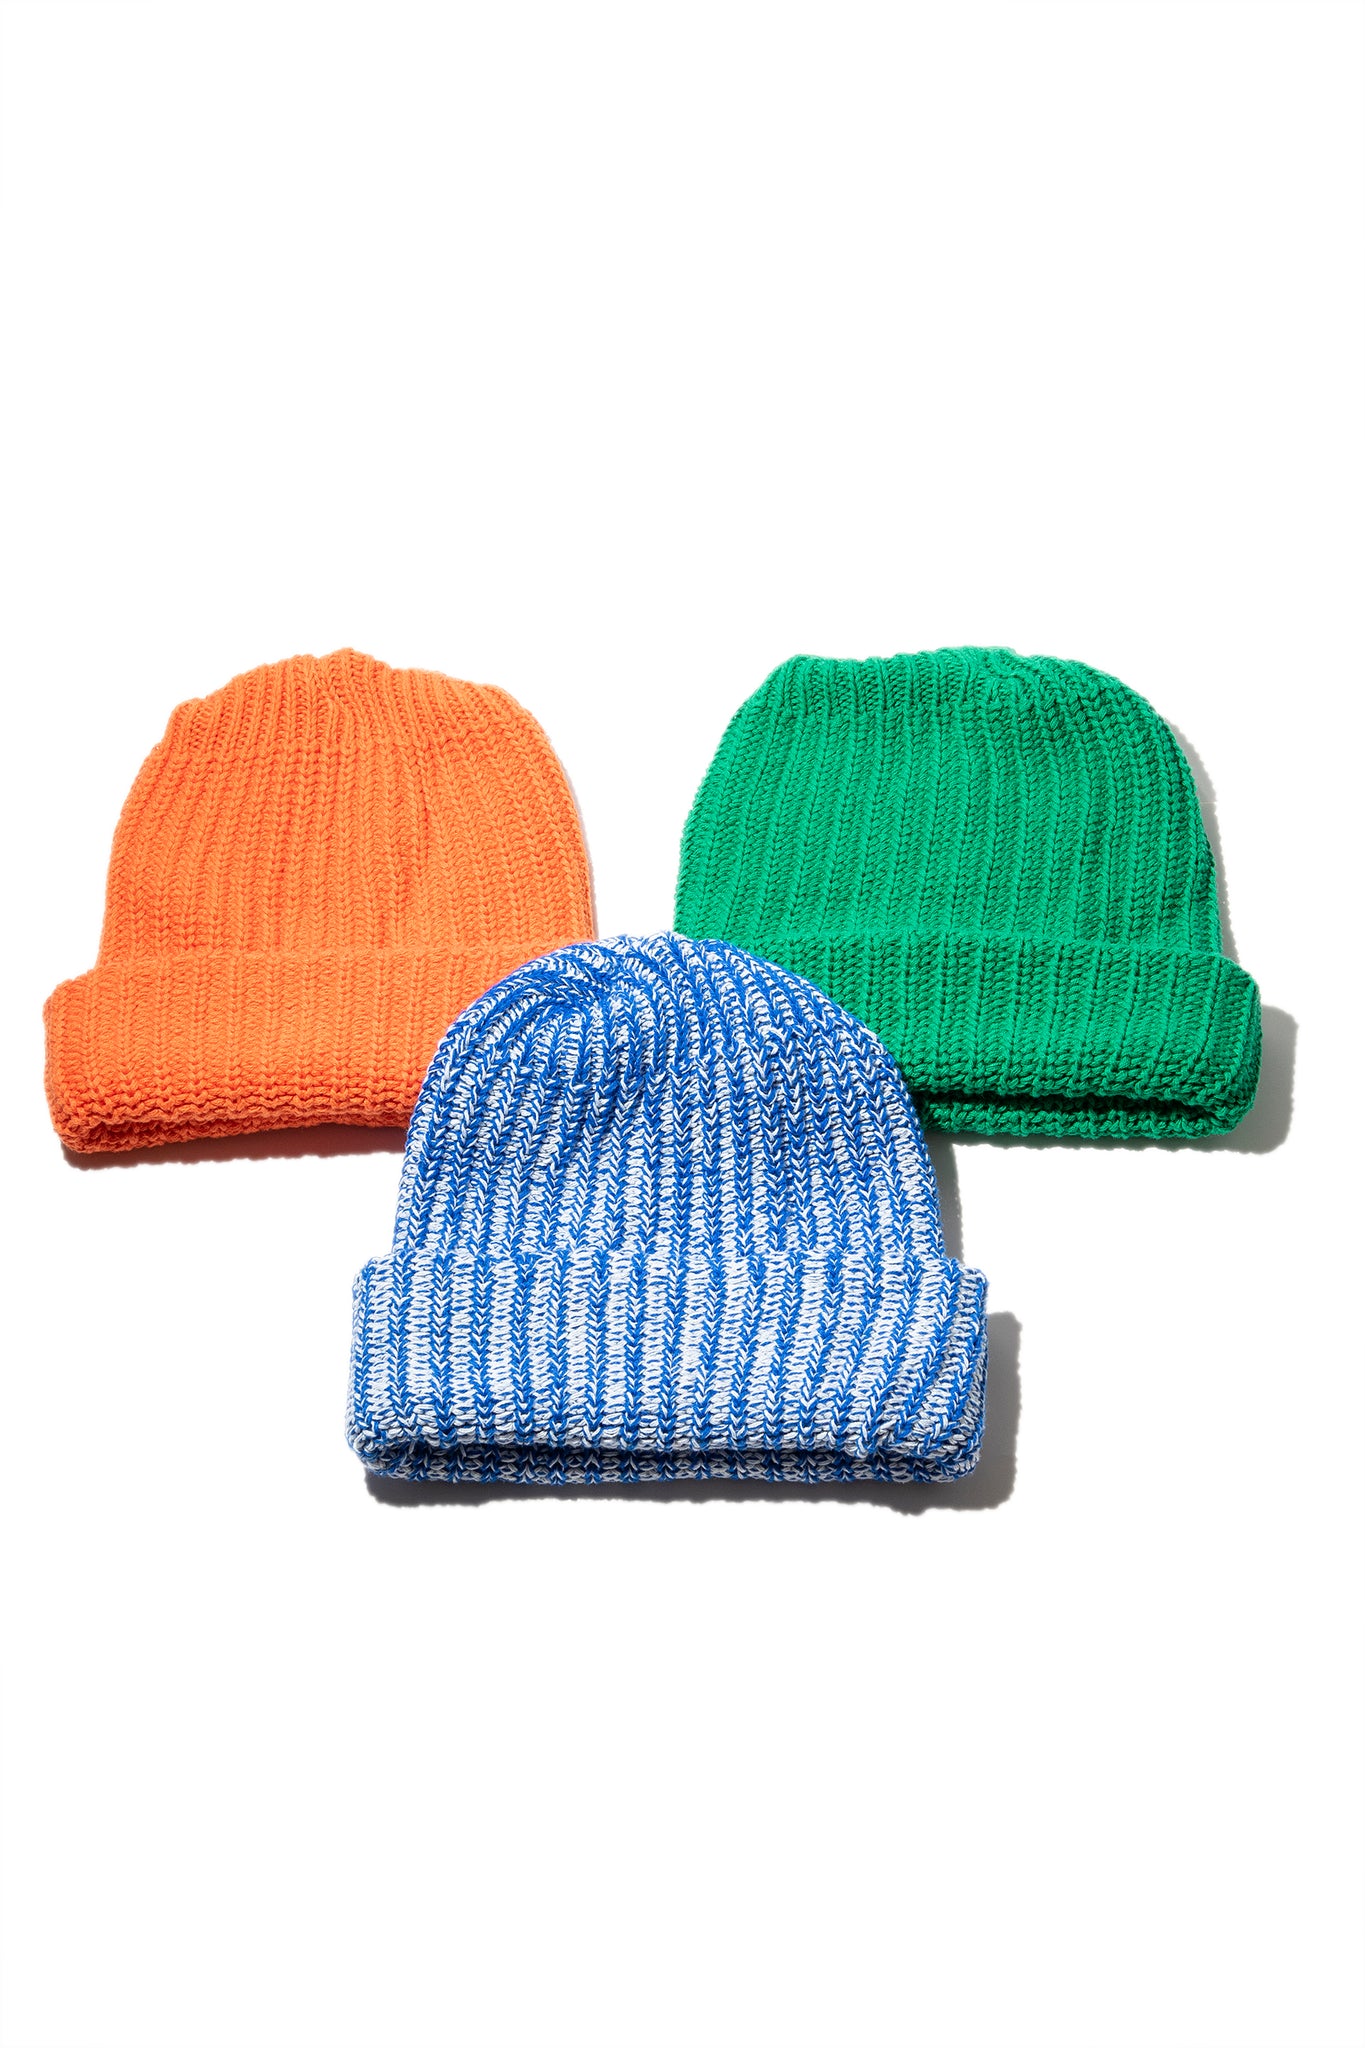 understory-shop - COLUMBIA KNITS - COTTON BEANIE